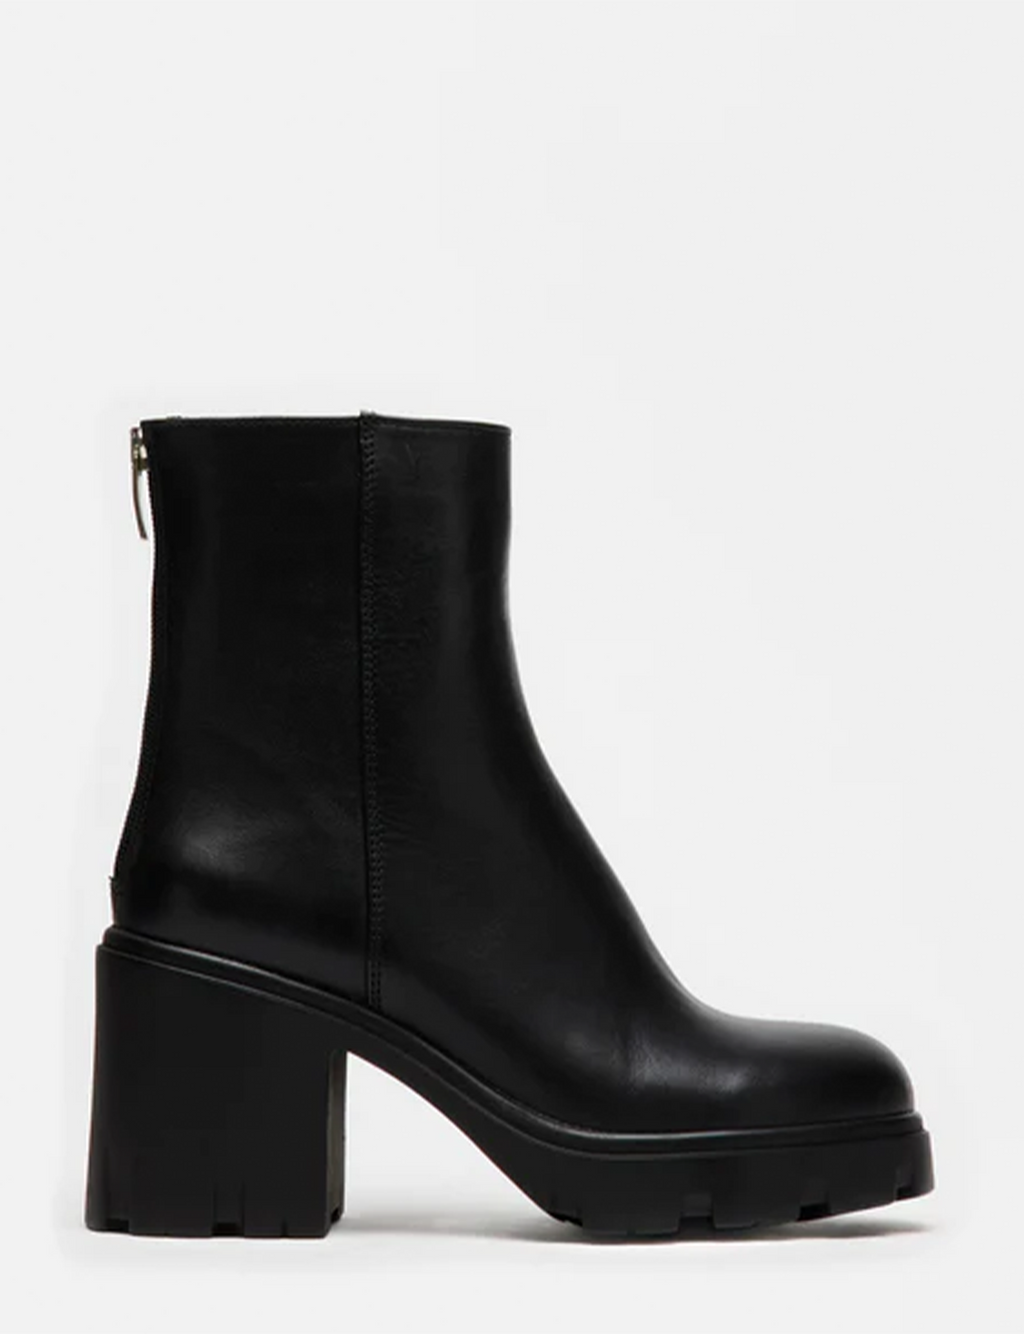 Goucho Boots, Black Leather